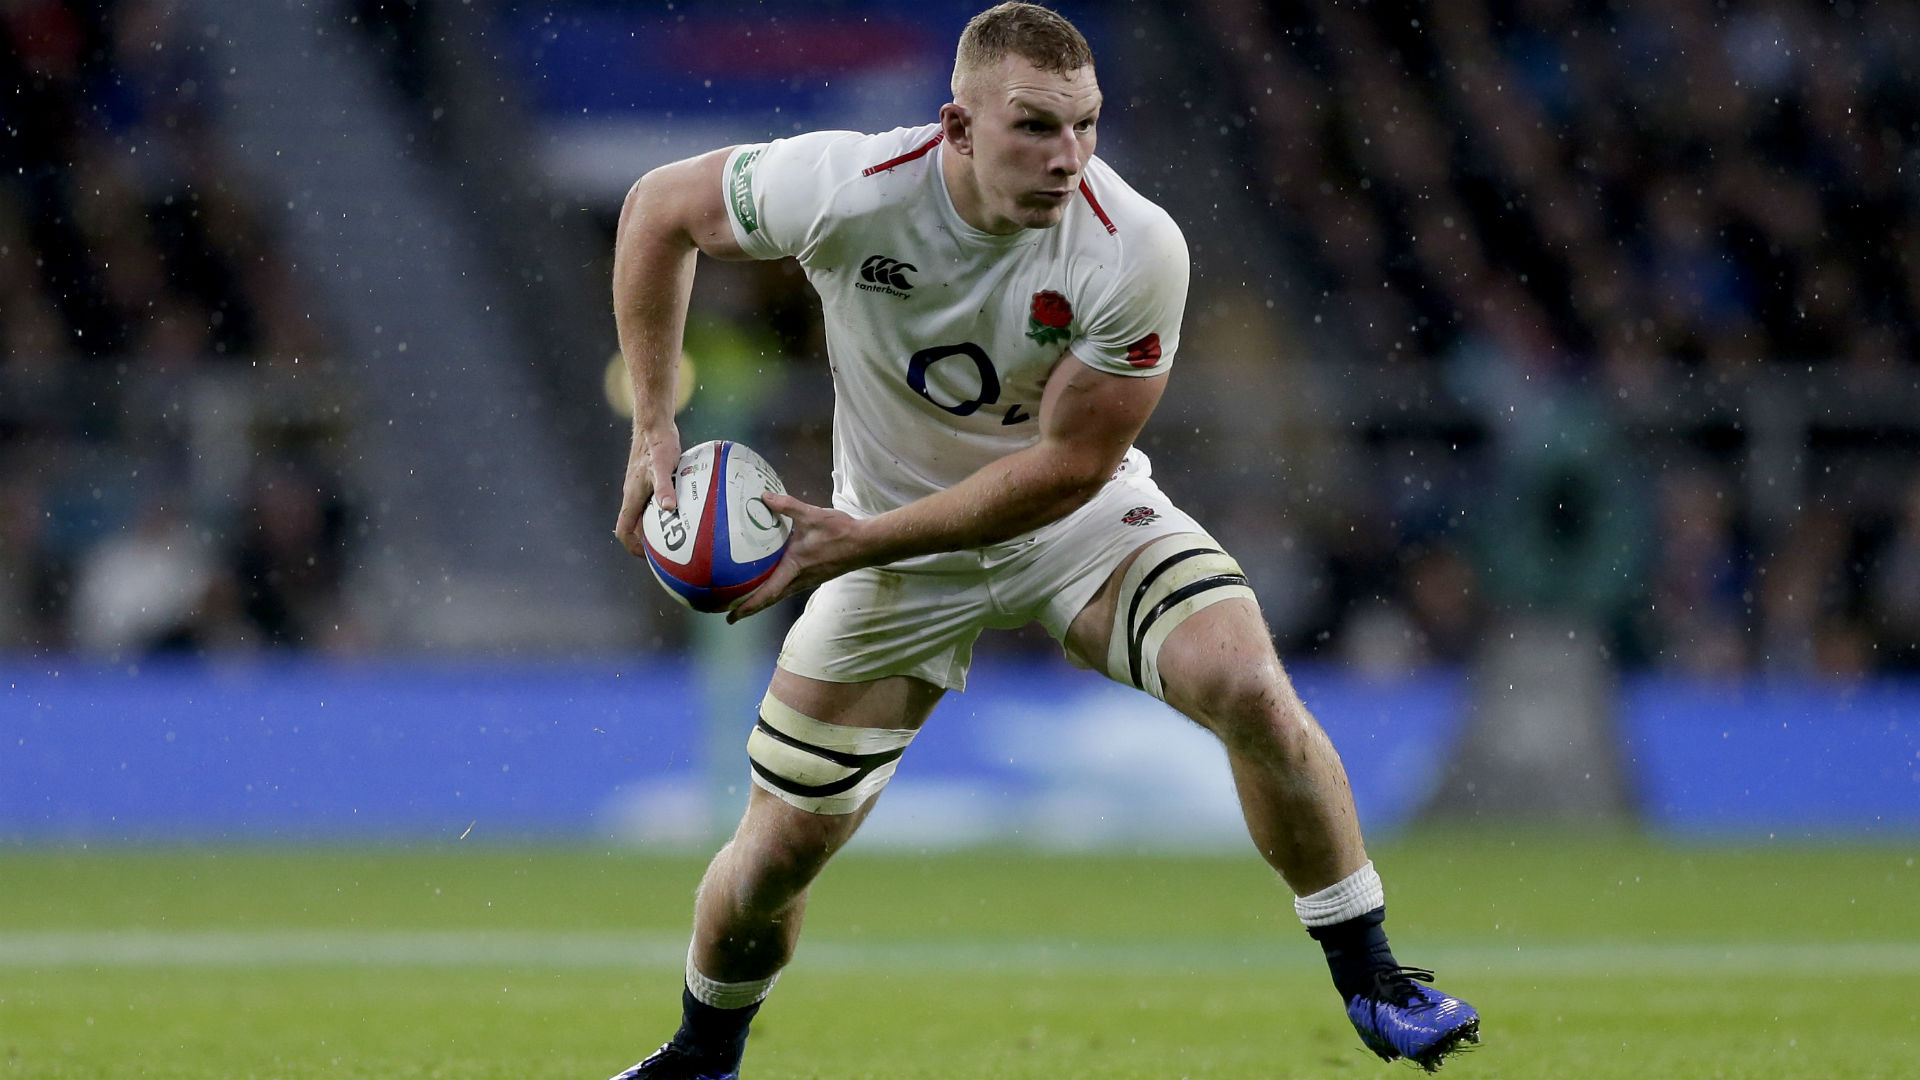 Three weeks before the start of the Six Nations, Sam Underhill has been ruled out of the tournament in a significant blow to England.